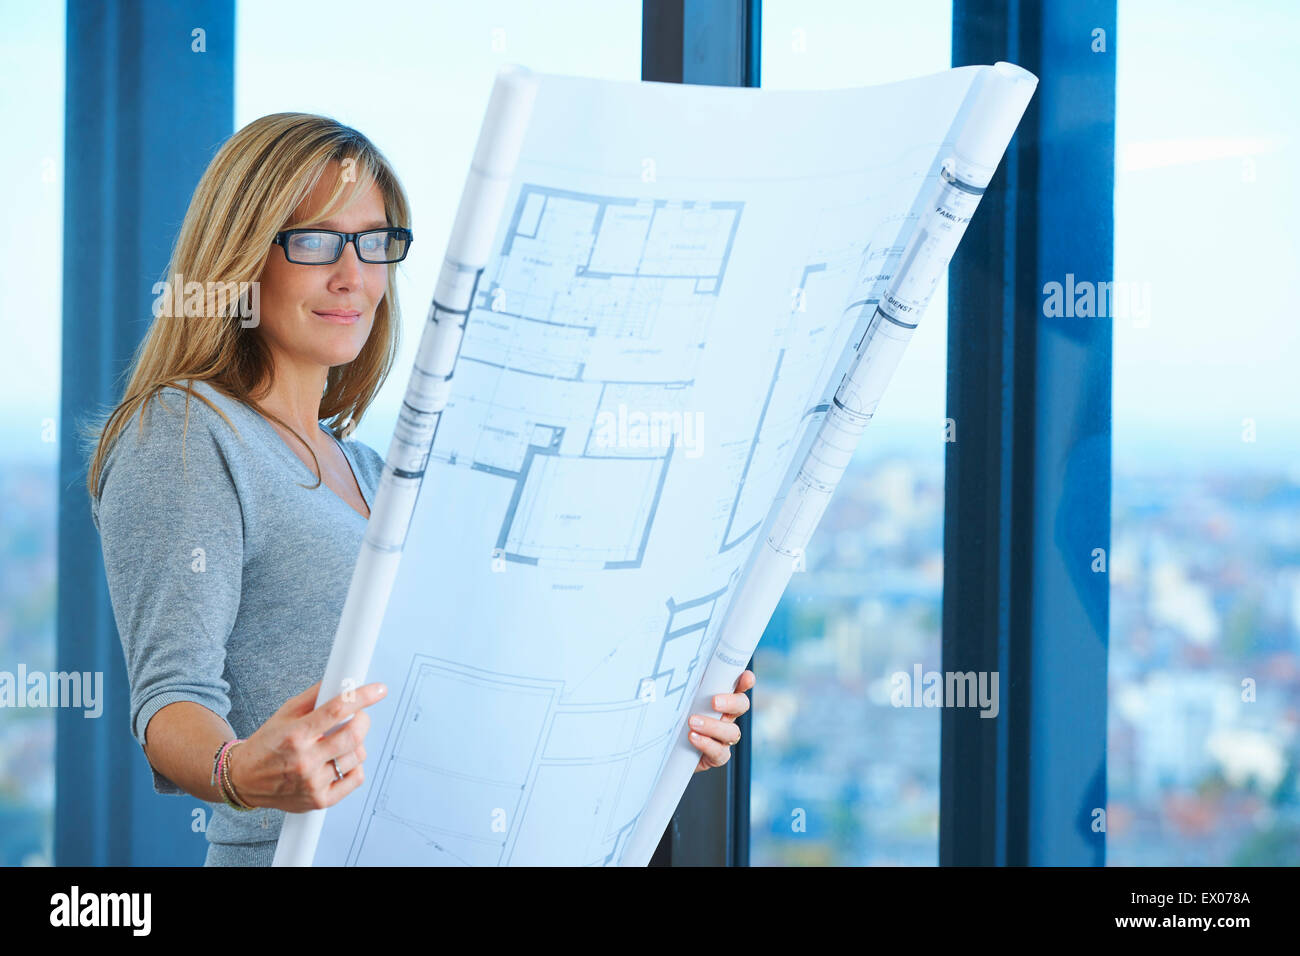 Mature female architect looking at plans in skyscraper office, Brussels, Belgium Stock Photo